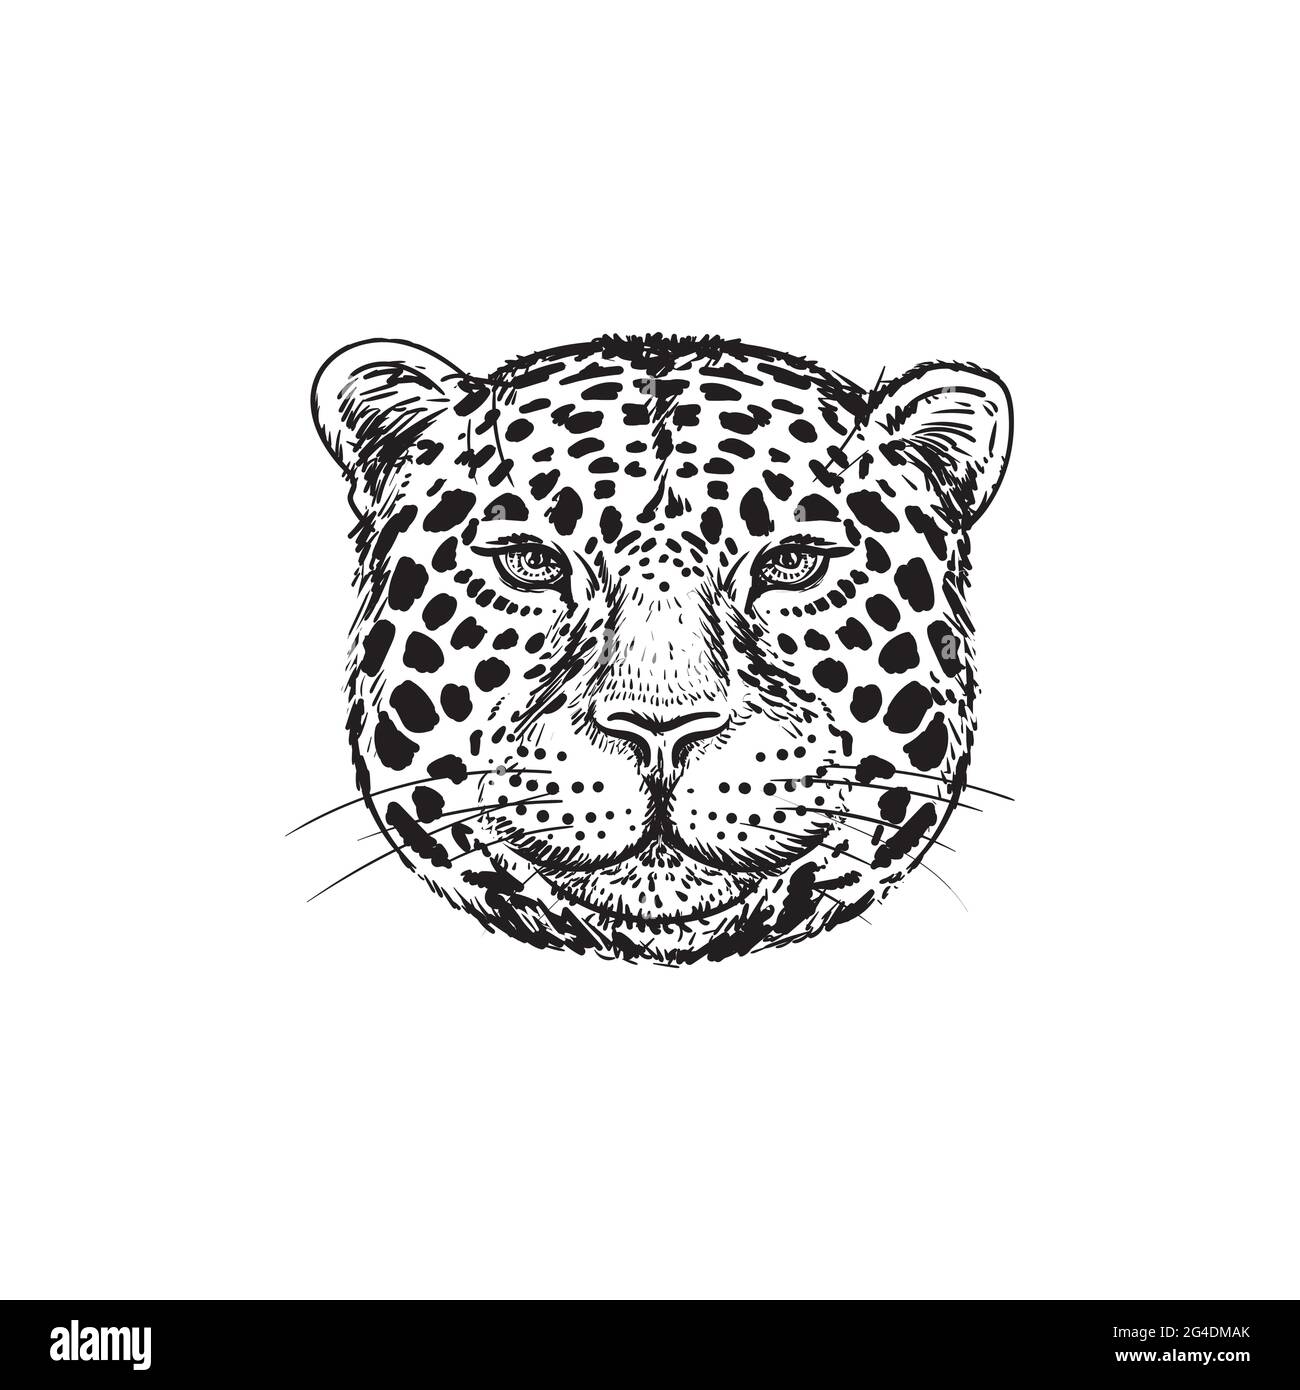 Hand drawing Leopard face isolated illustration on white background. Portrait of Jaguar. Cute fluffy face of Big cat.Beast logo.Predator head sketch. Stock Vector